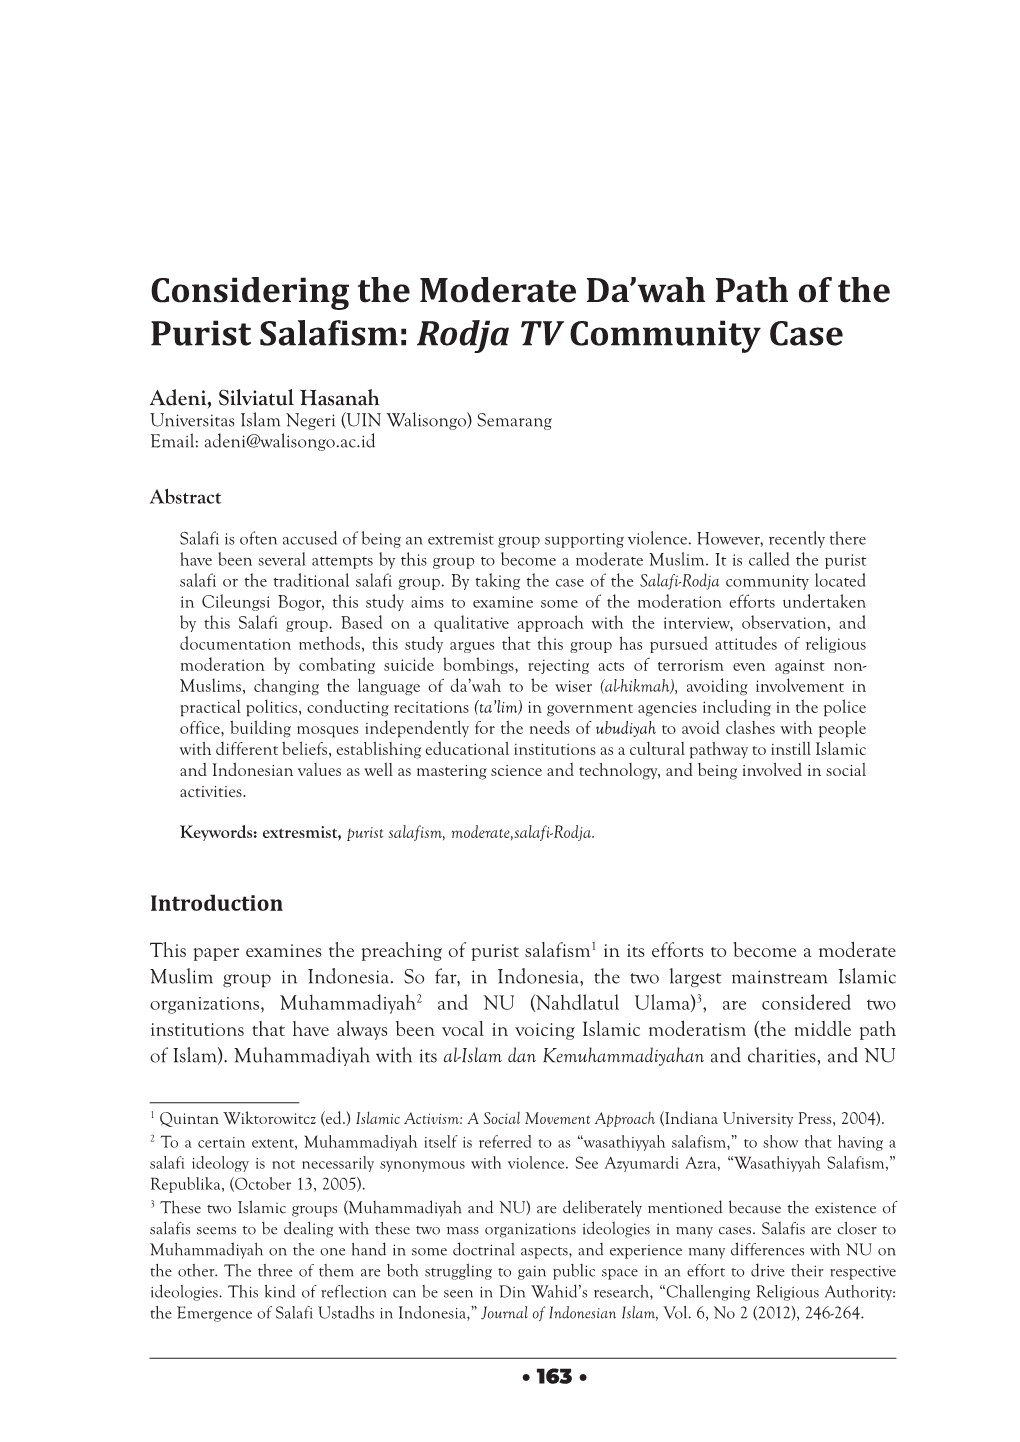 Considering the Moderate Da'wah Path of the Purist Salafism: Rodja